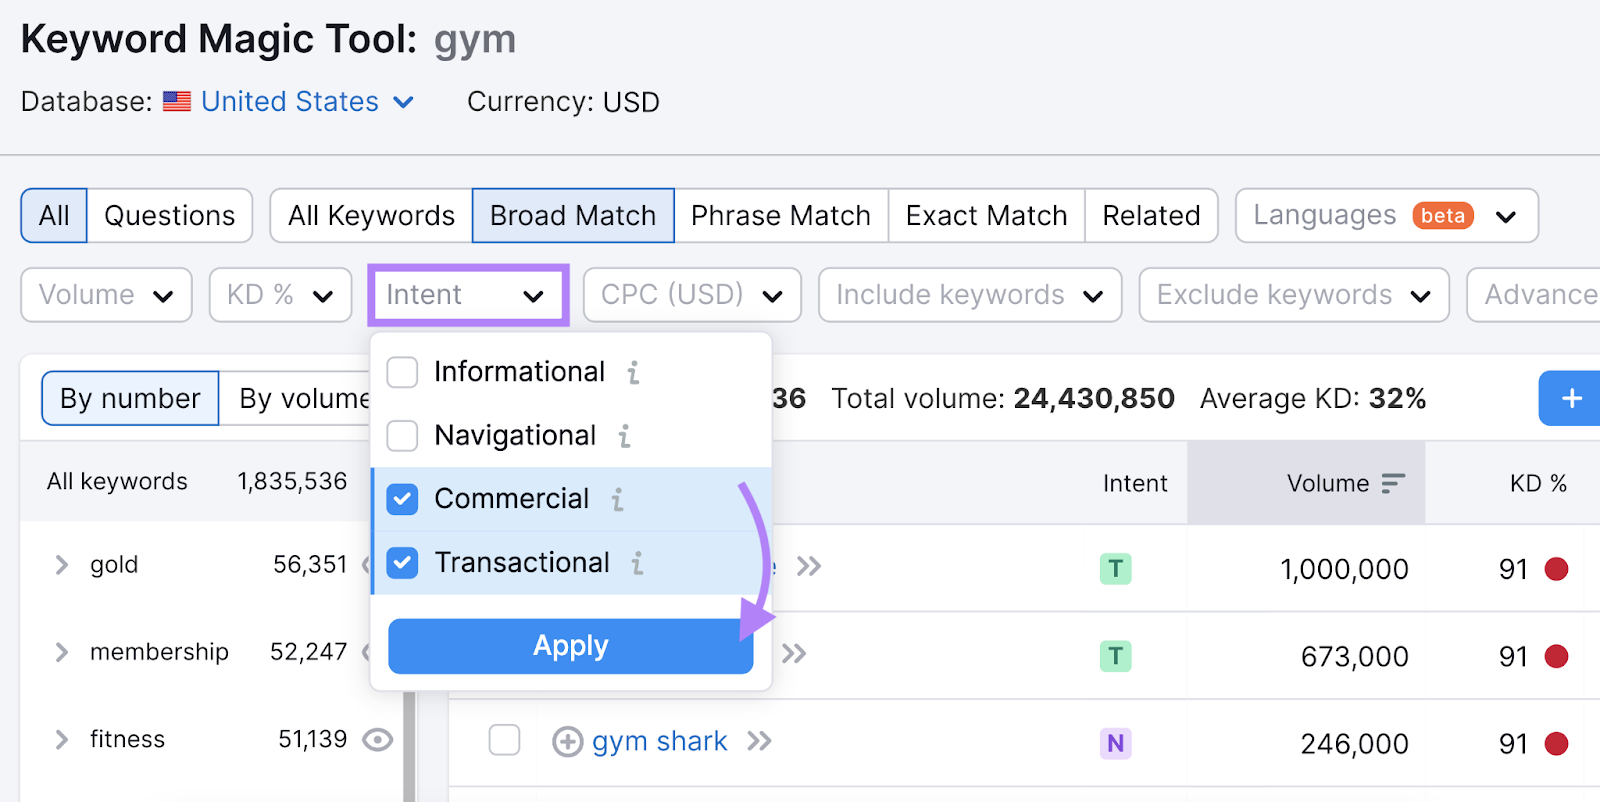 "Commercial," and "Transactional" options selected under "Intent" filter drop-down menu